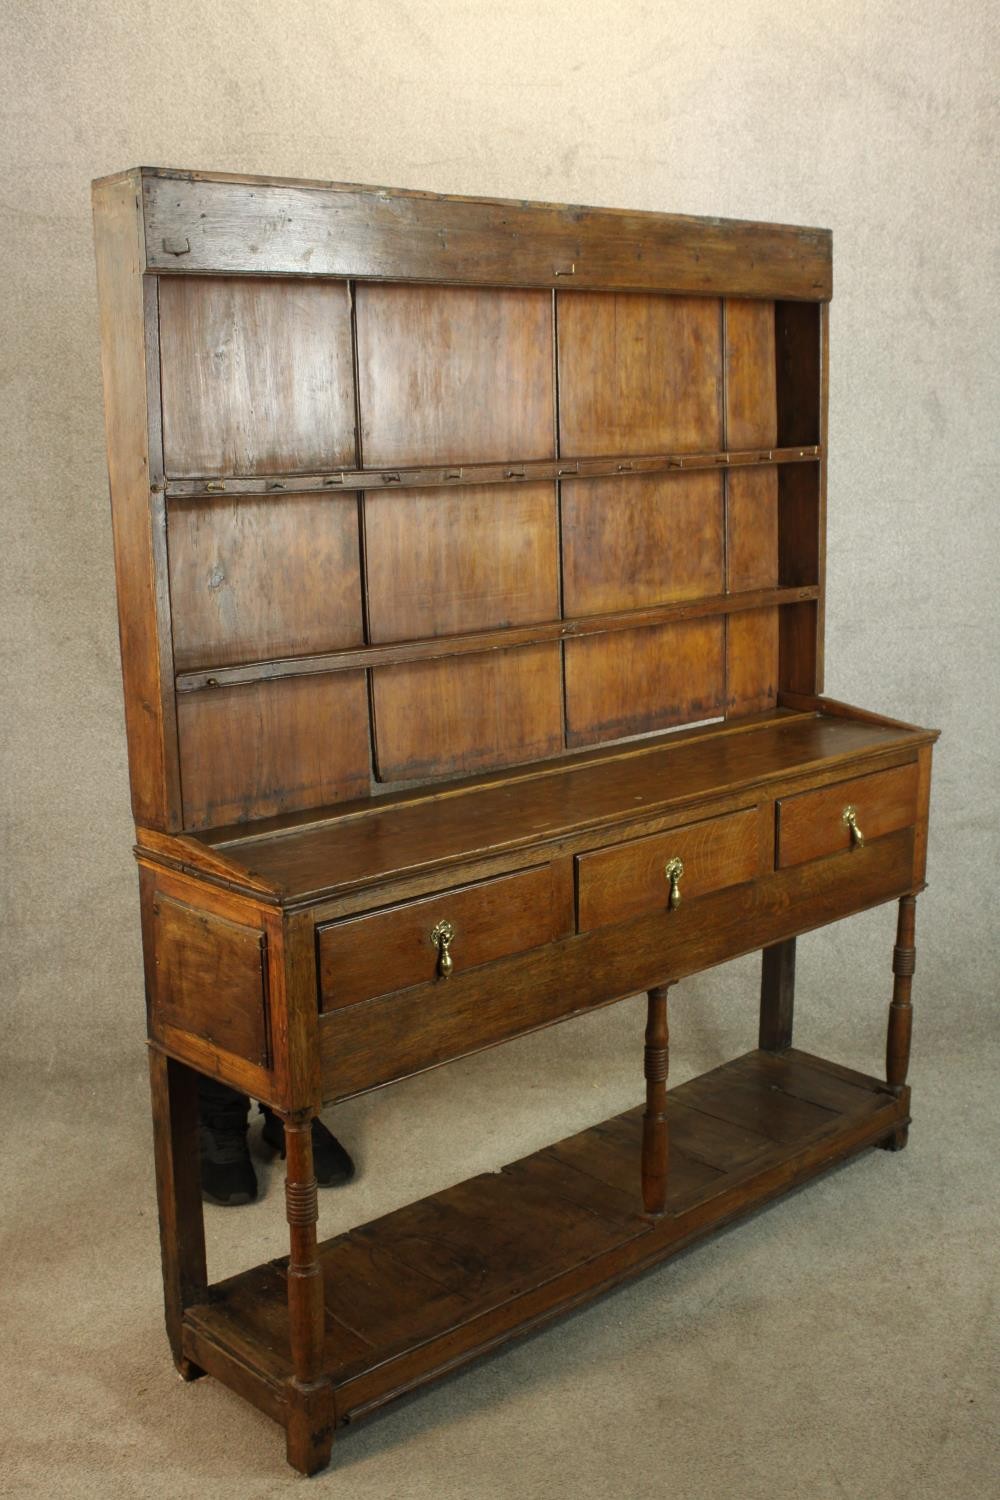 A 19th/early 20th century oak kitchen dresser, with plate rack back standing above three drawers - Image 4 of 4